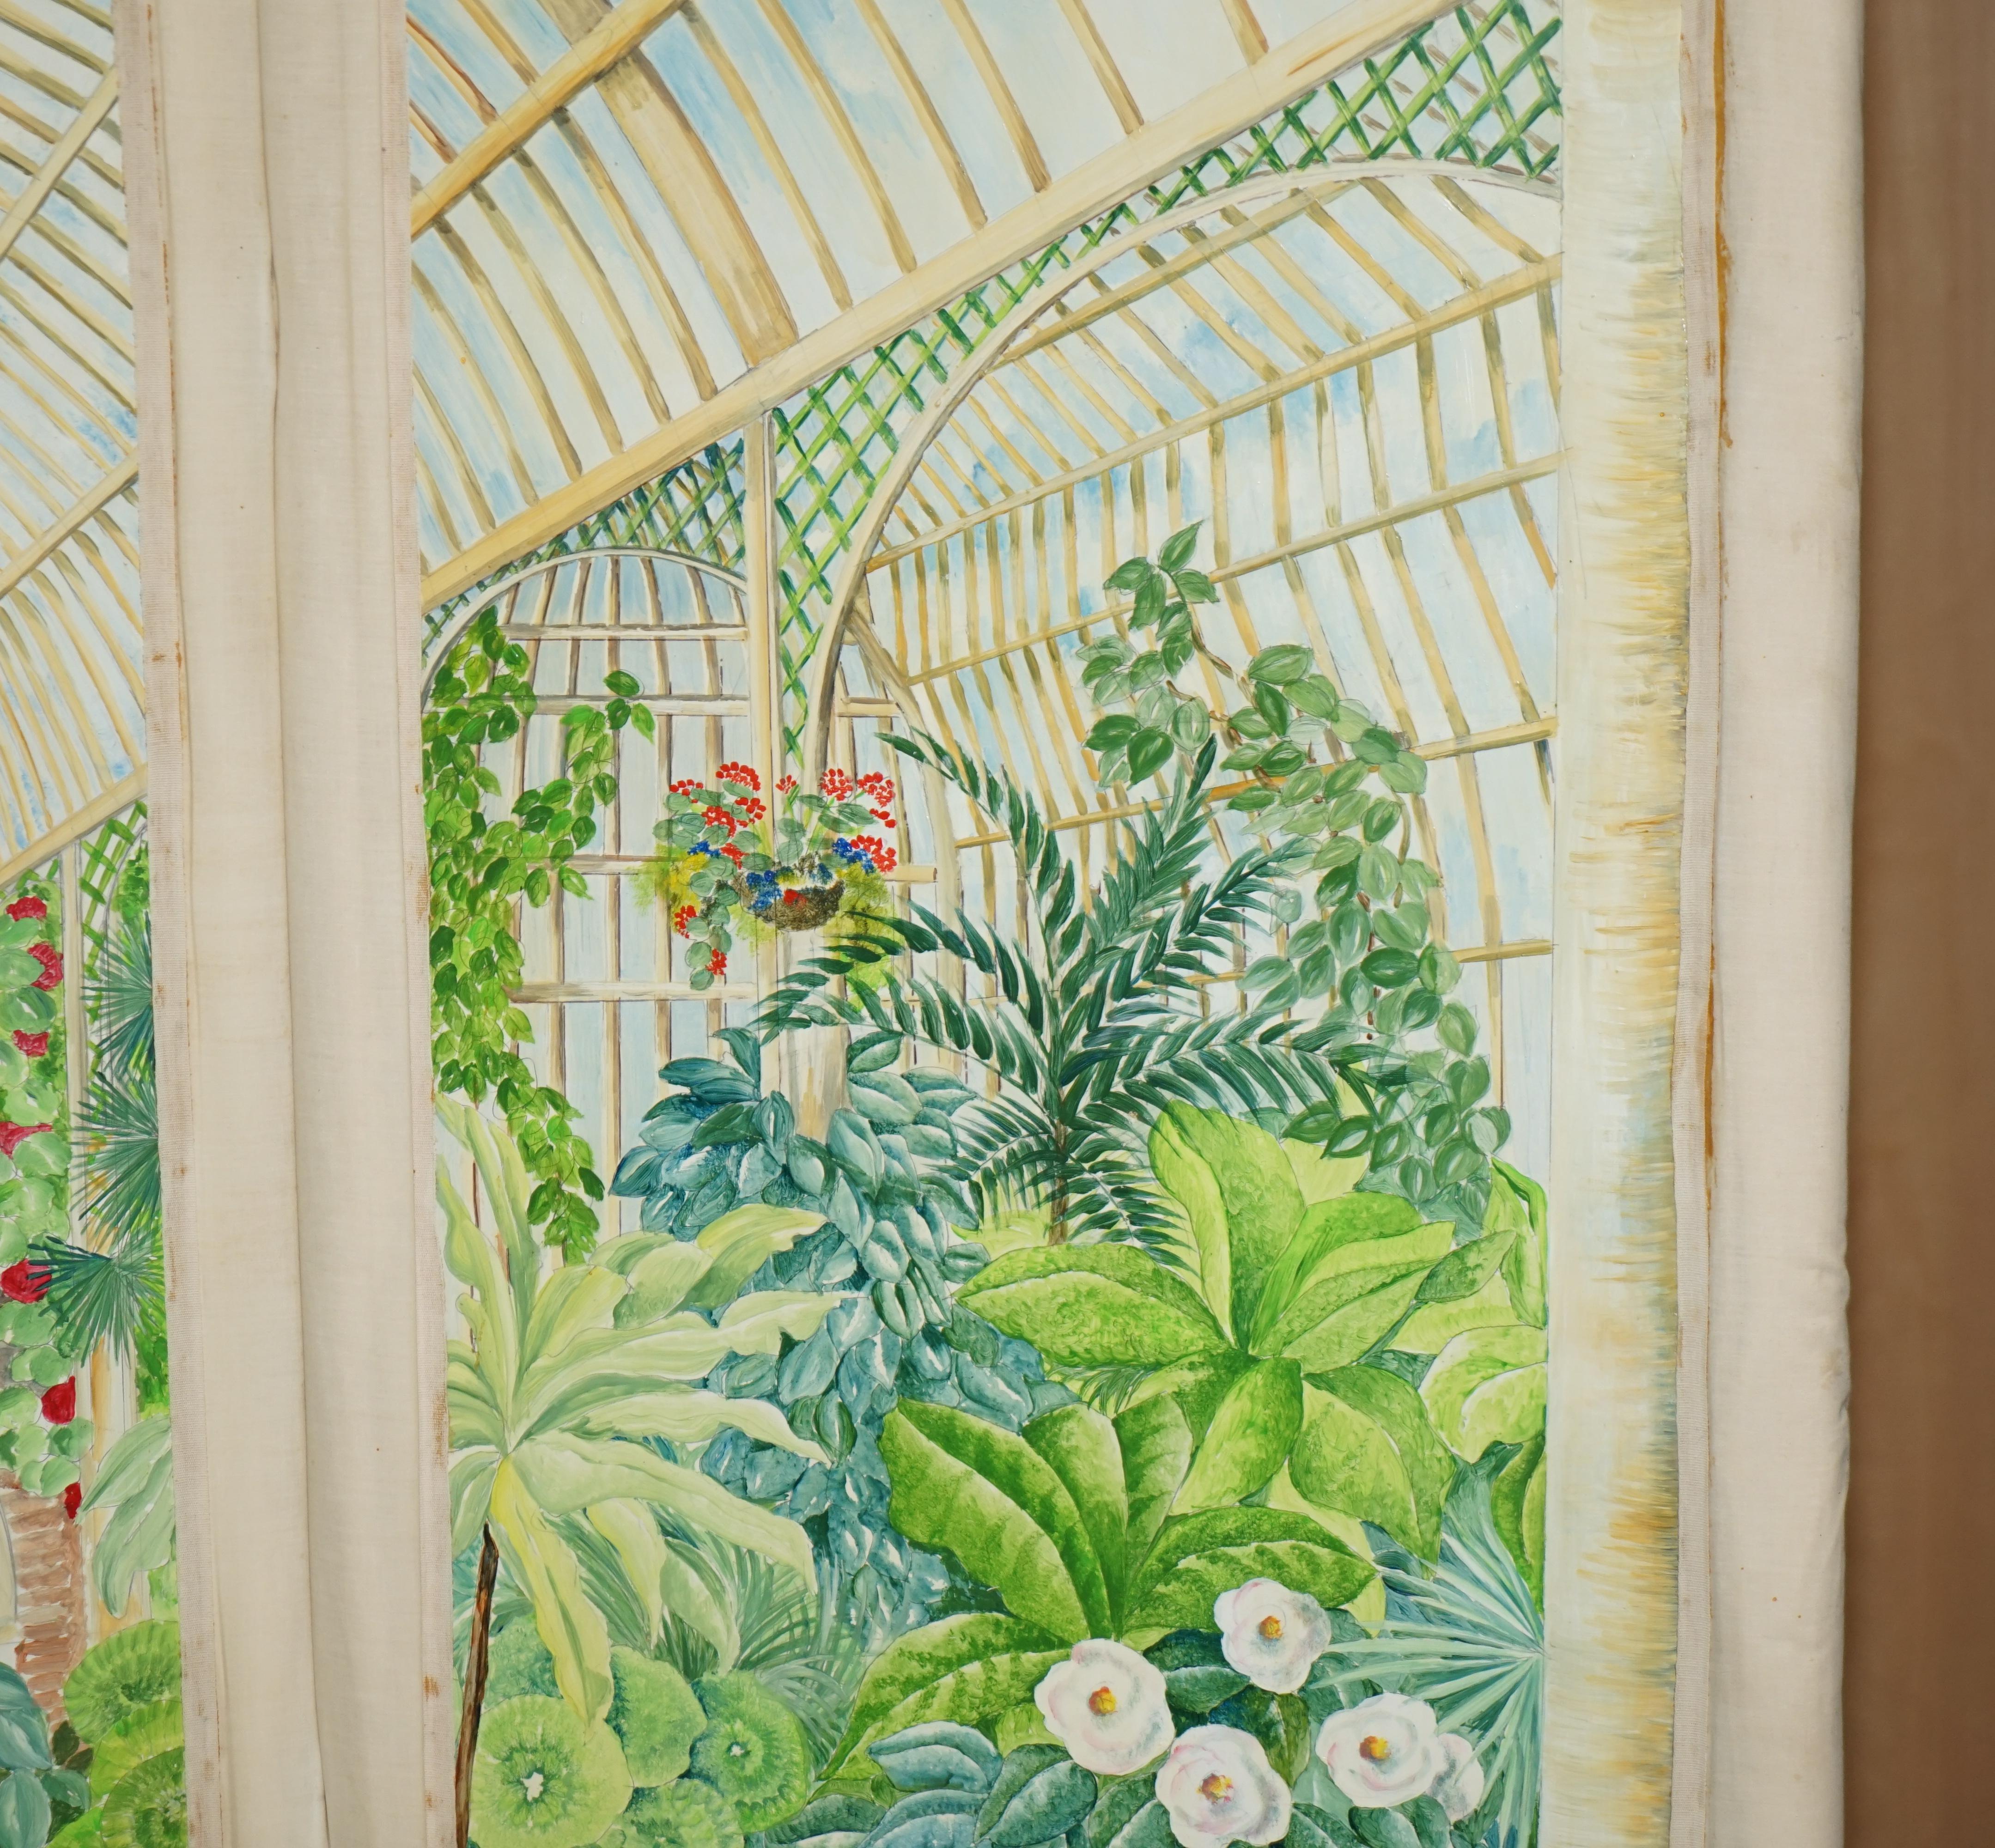 STUNNING VERY LARGE 1930's WATERCOLOR ROOM DIVIDER FOLDING SCREEN GARDEN SCENE For Sale 6